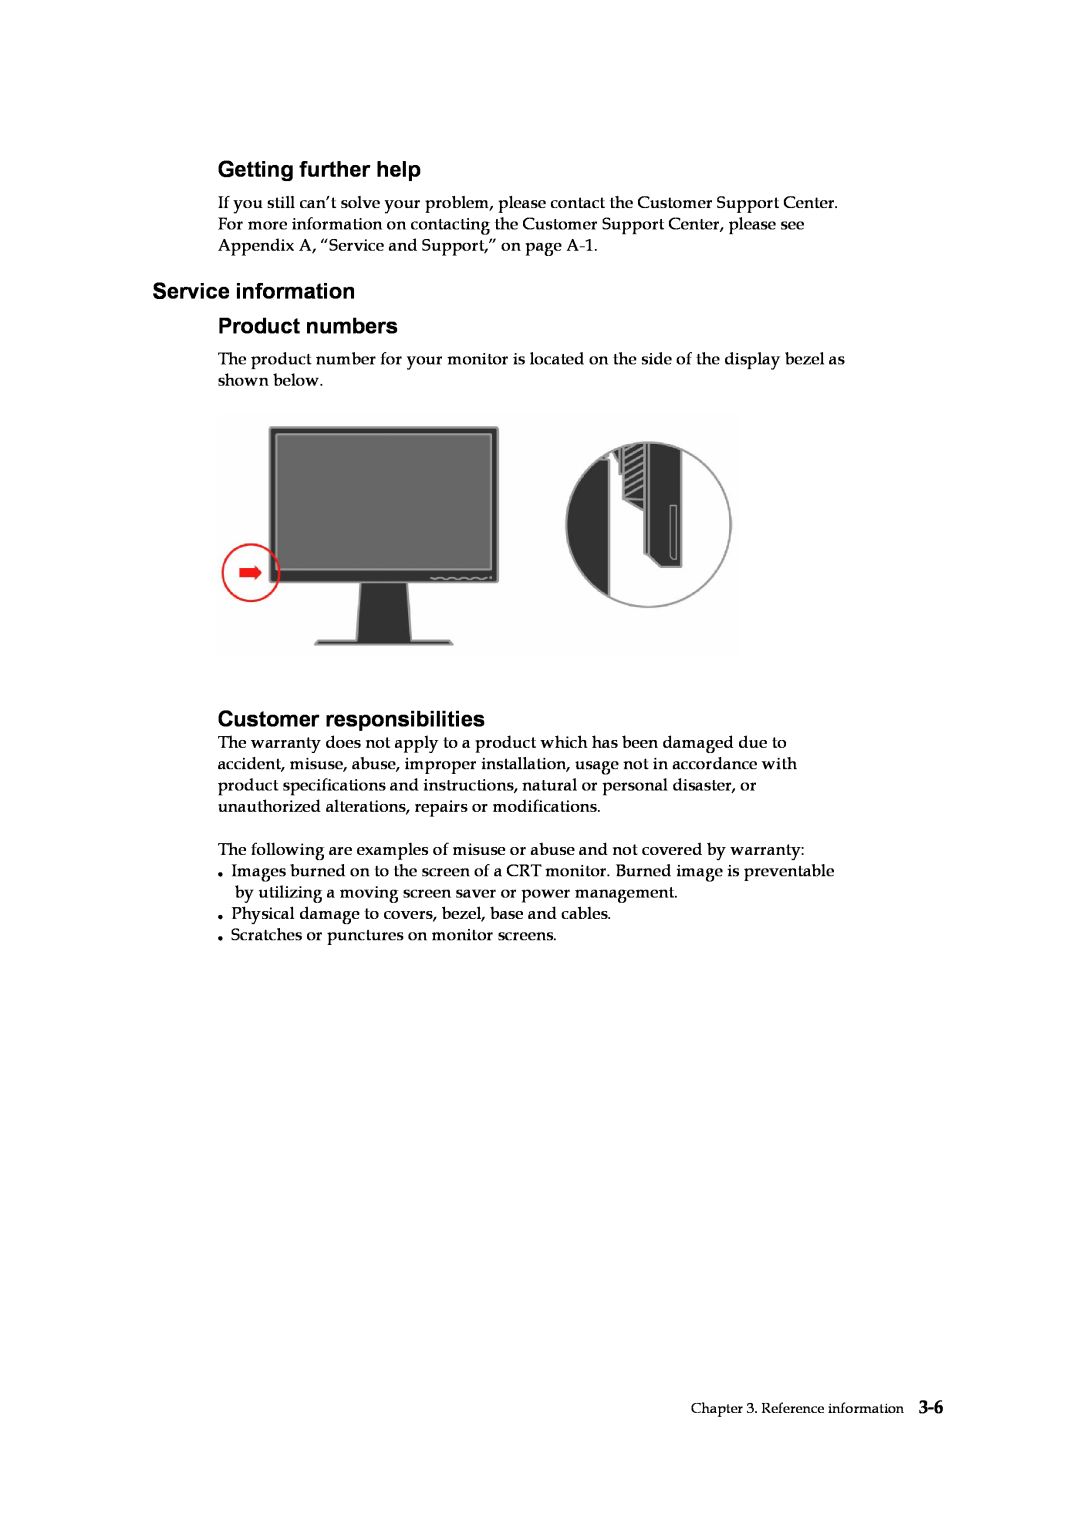 Lenovo L2240p manual Getting further help, Service information Product numbers, Customer responsibilities 